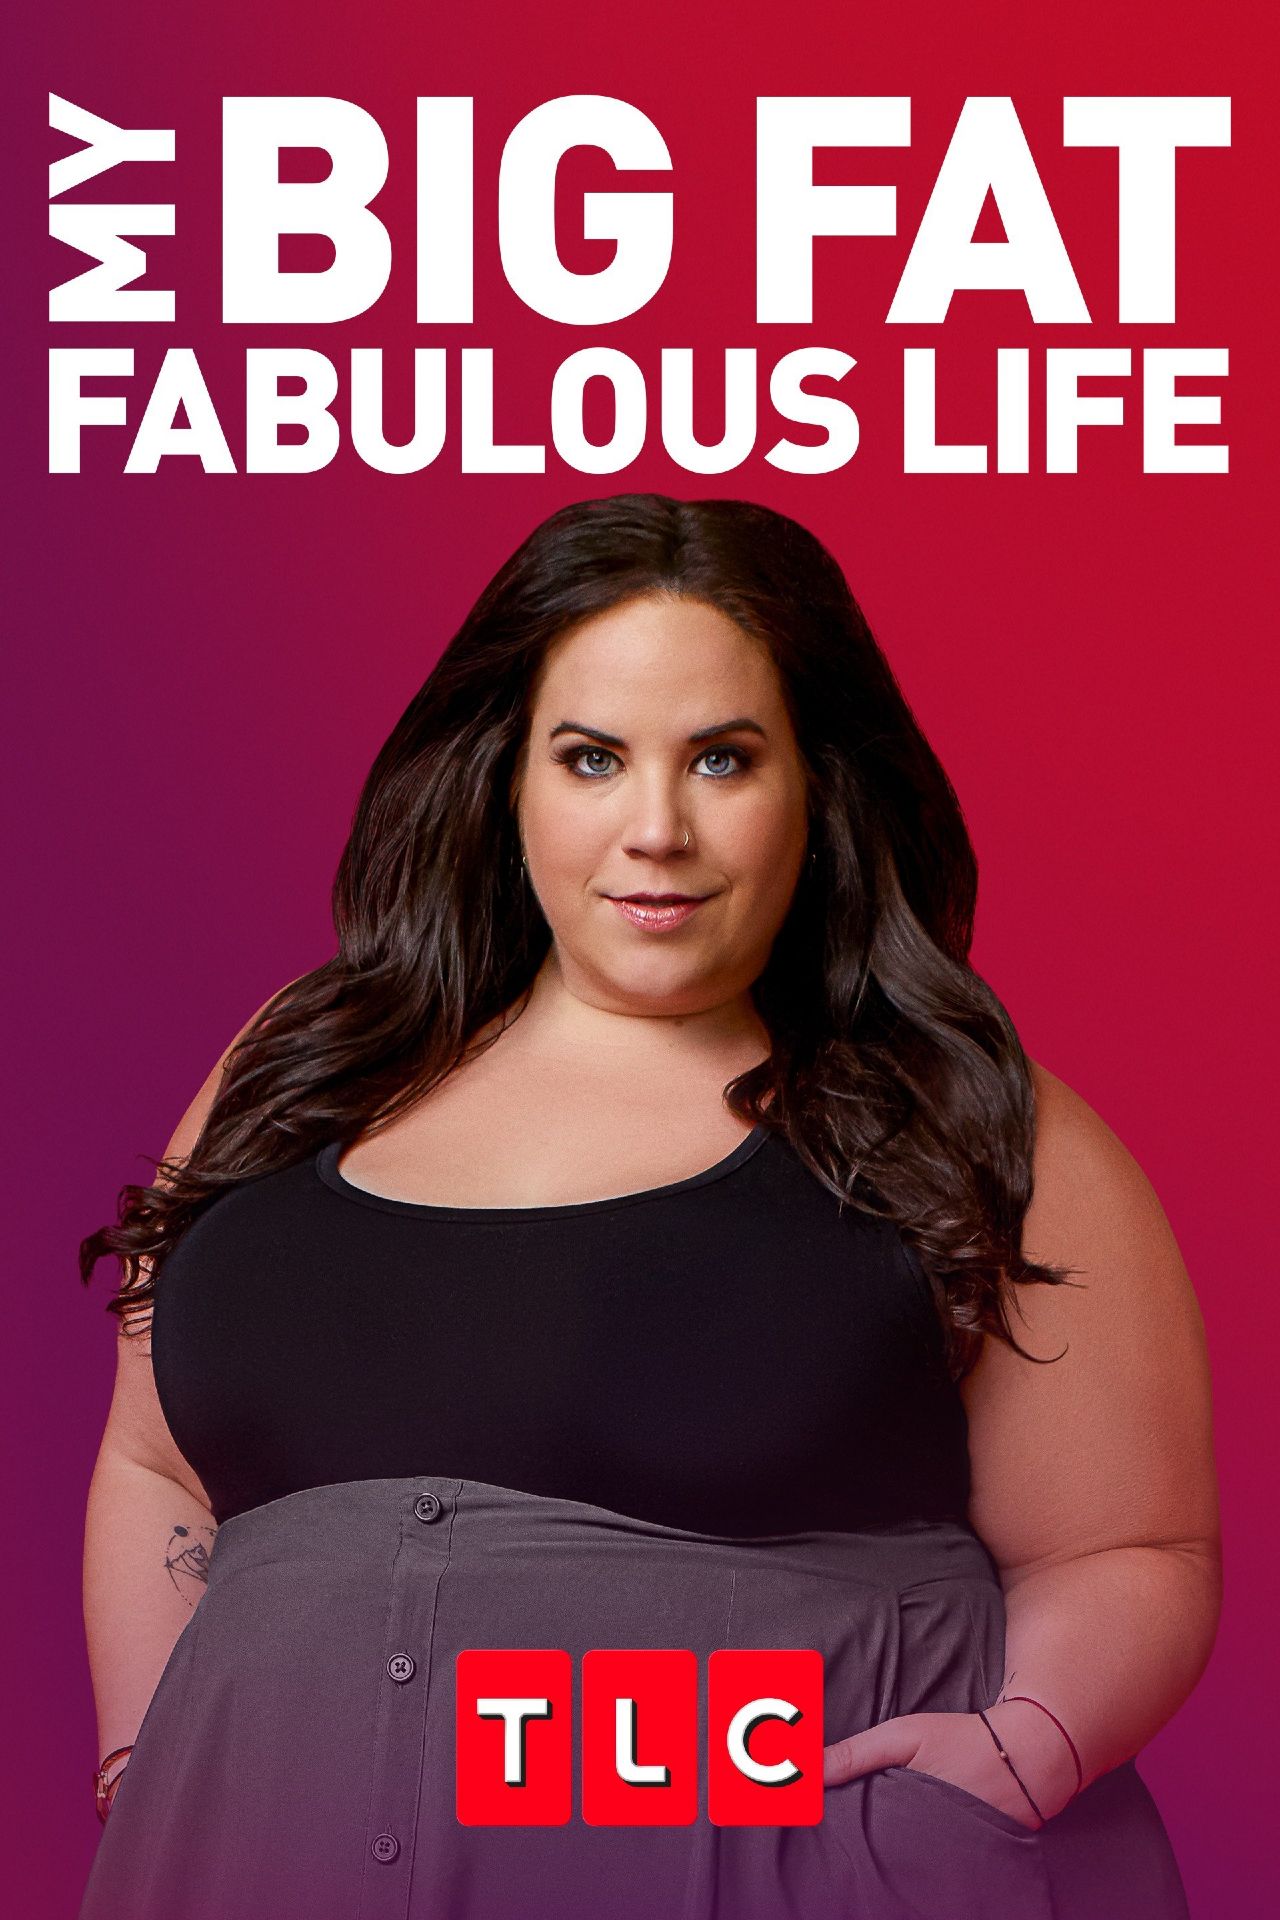 My Big Fat Fabulous Life: Whitney Thore’s Weight Loss Transformation In Photos